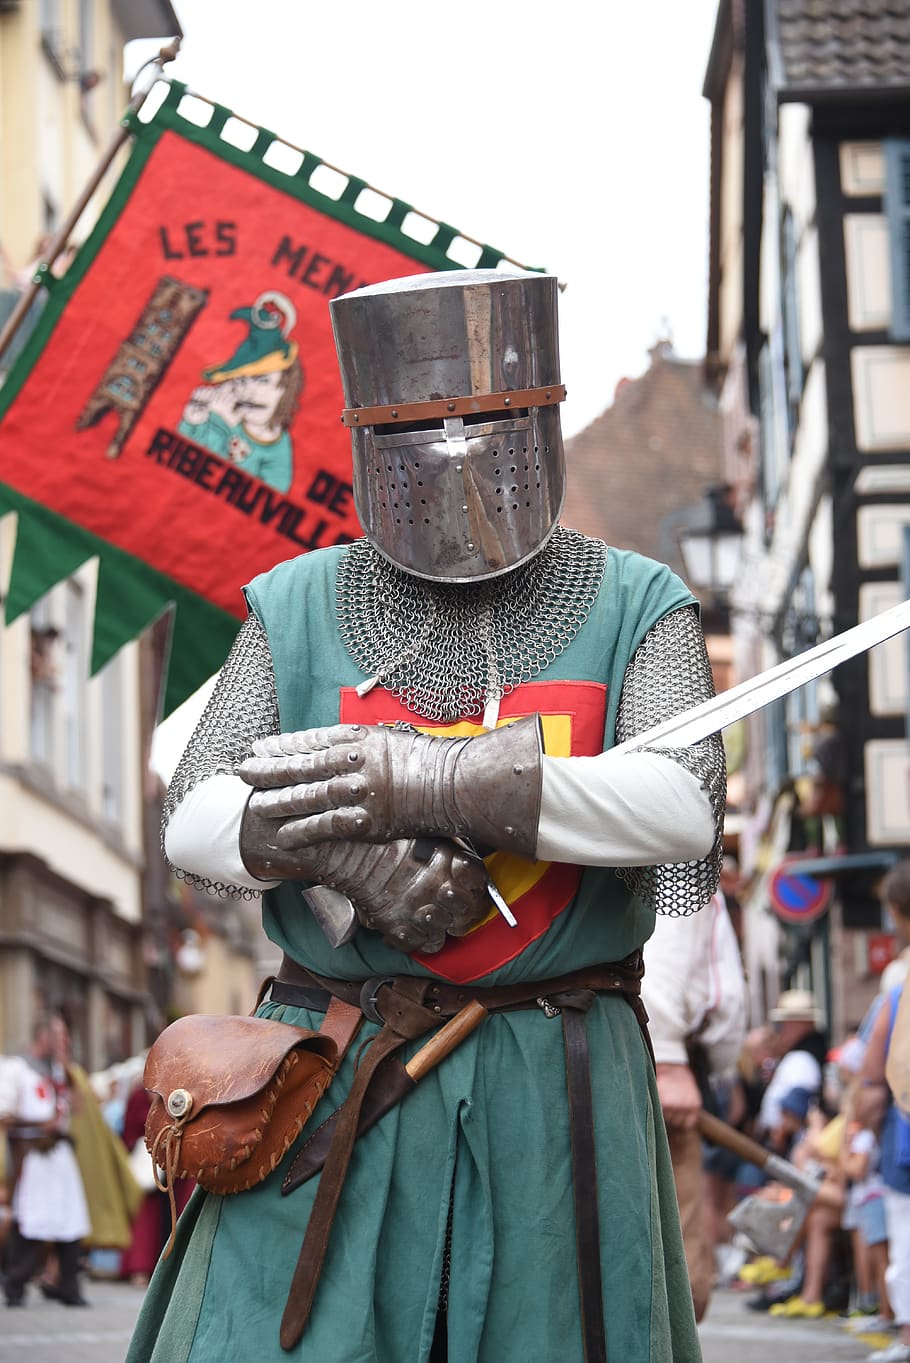 knight, medieval, armor, sword, focus on foreground, incidental people, day, real people, one person, holding